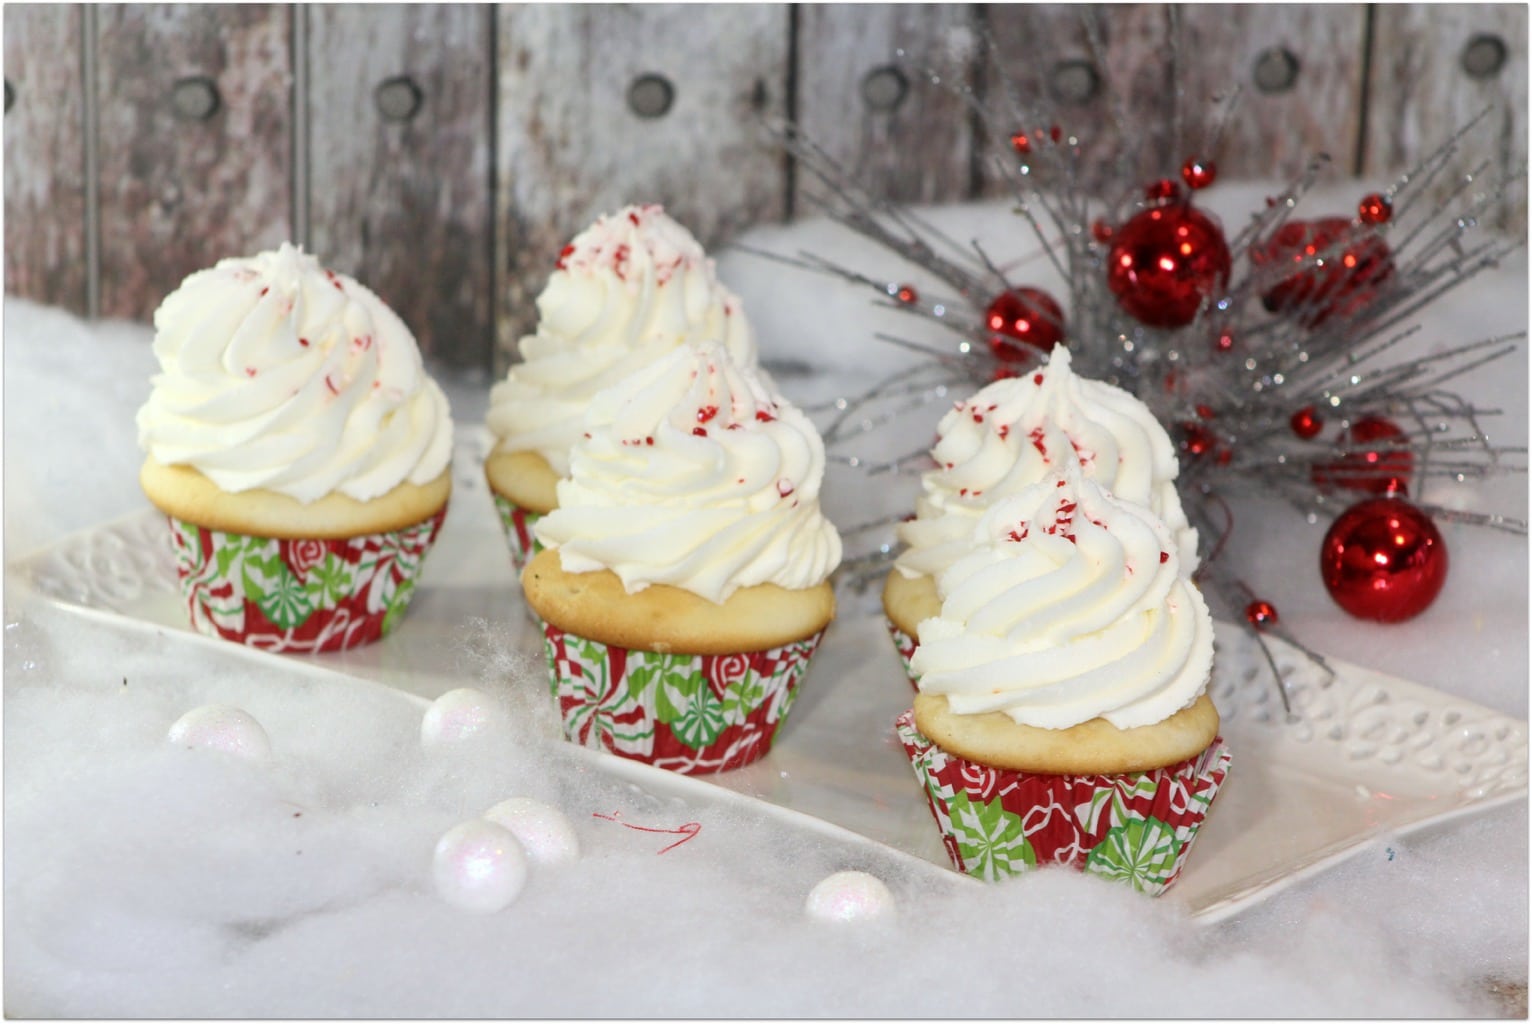 Who wants a Christmas cupcake? I’ve told you before that cupcakes are one of my favorite desserts for parties and celebrations, especially when kids are involved. This is an easy dessert recipe, but the result is just beautiful! As I always say, don’t buy cupcakes when you can DIY! Want to be able to produce a beautiful topping of frosting like you see here? My secret is the Wilton Frosting gun! You won’t believe how easy it is to produce professional looking desserts!